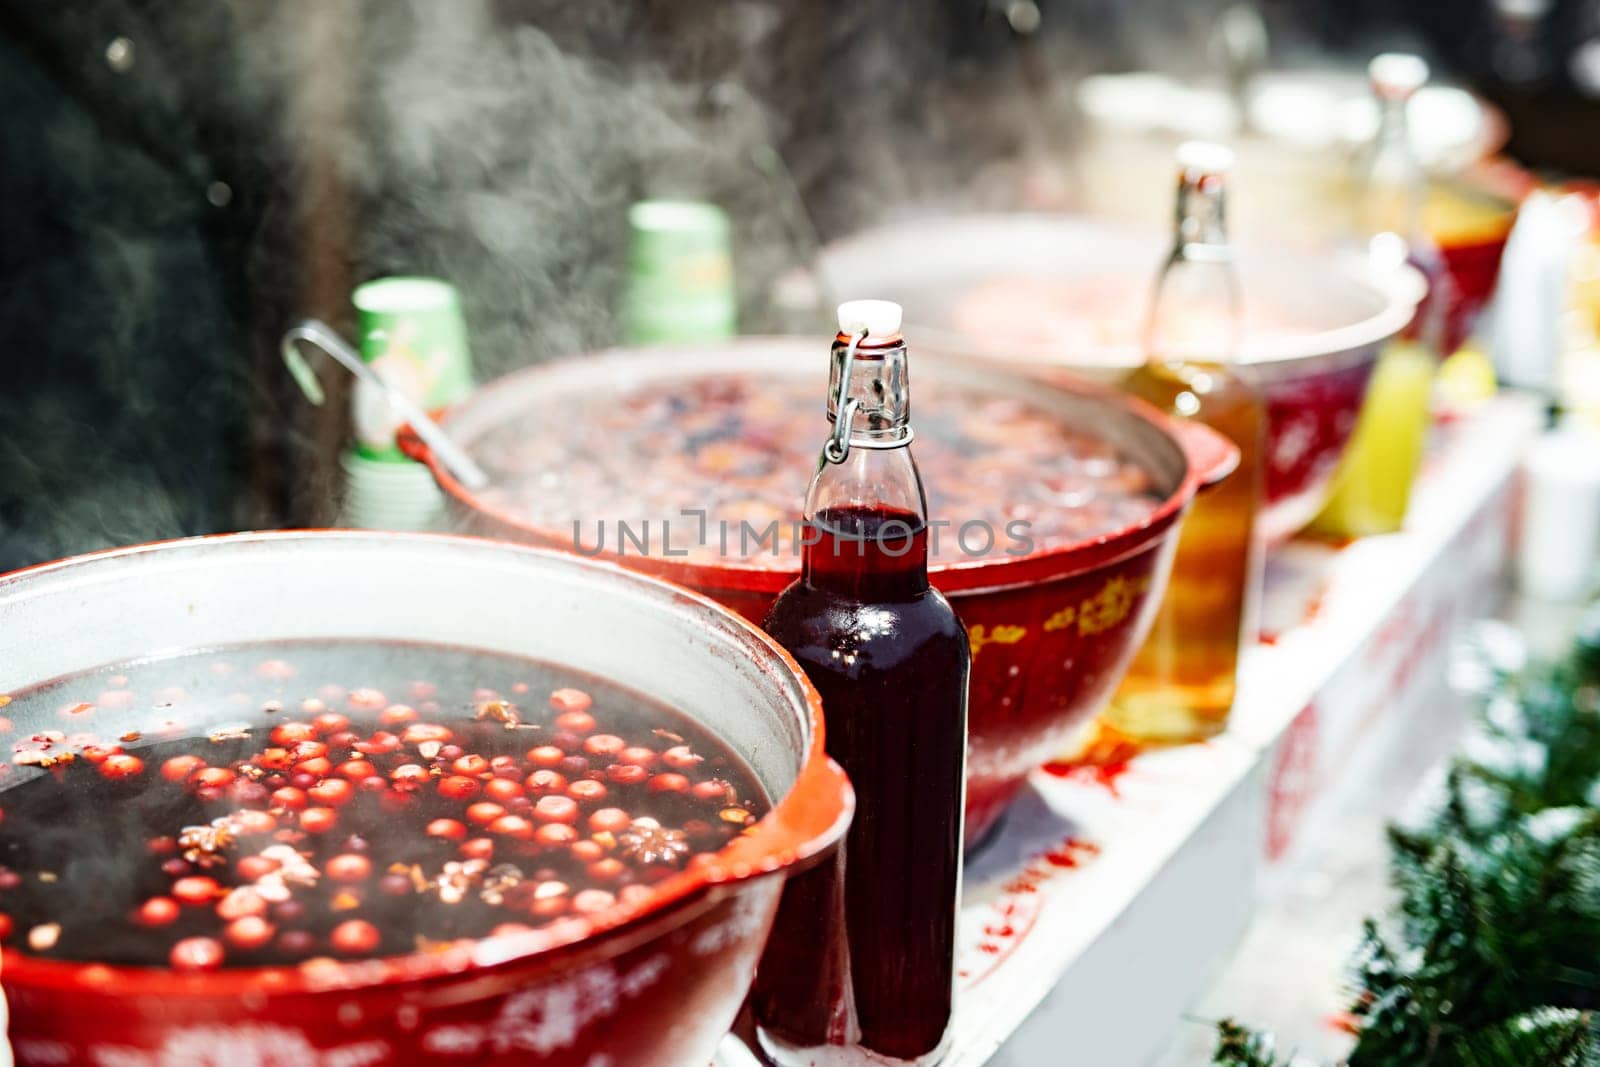 Beverages berries hot mulled wine in pots in street food market at Christmas time. Colorful festive hot drinks at fair xmas festival outdoors closeup